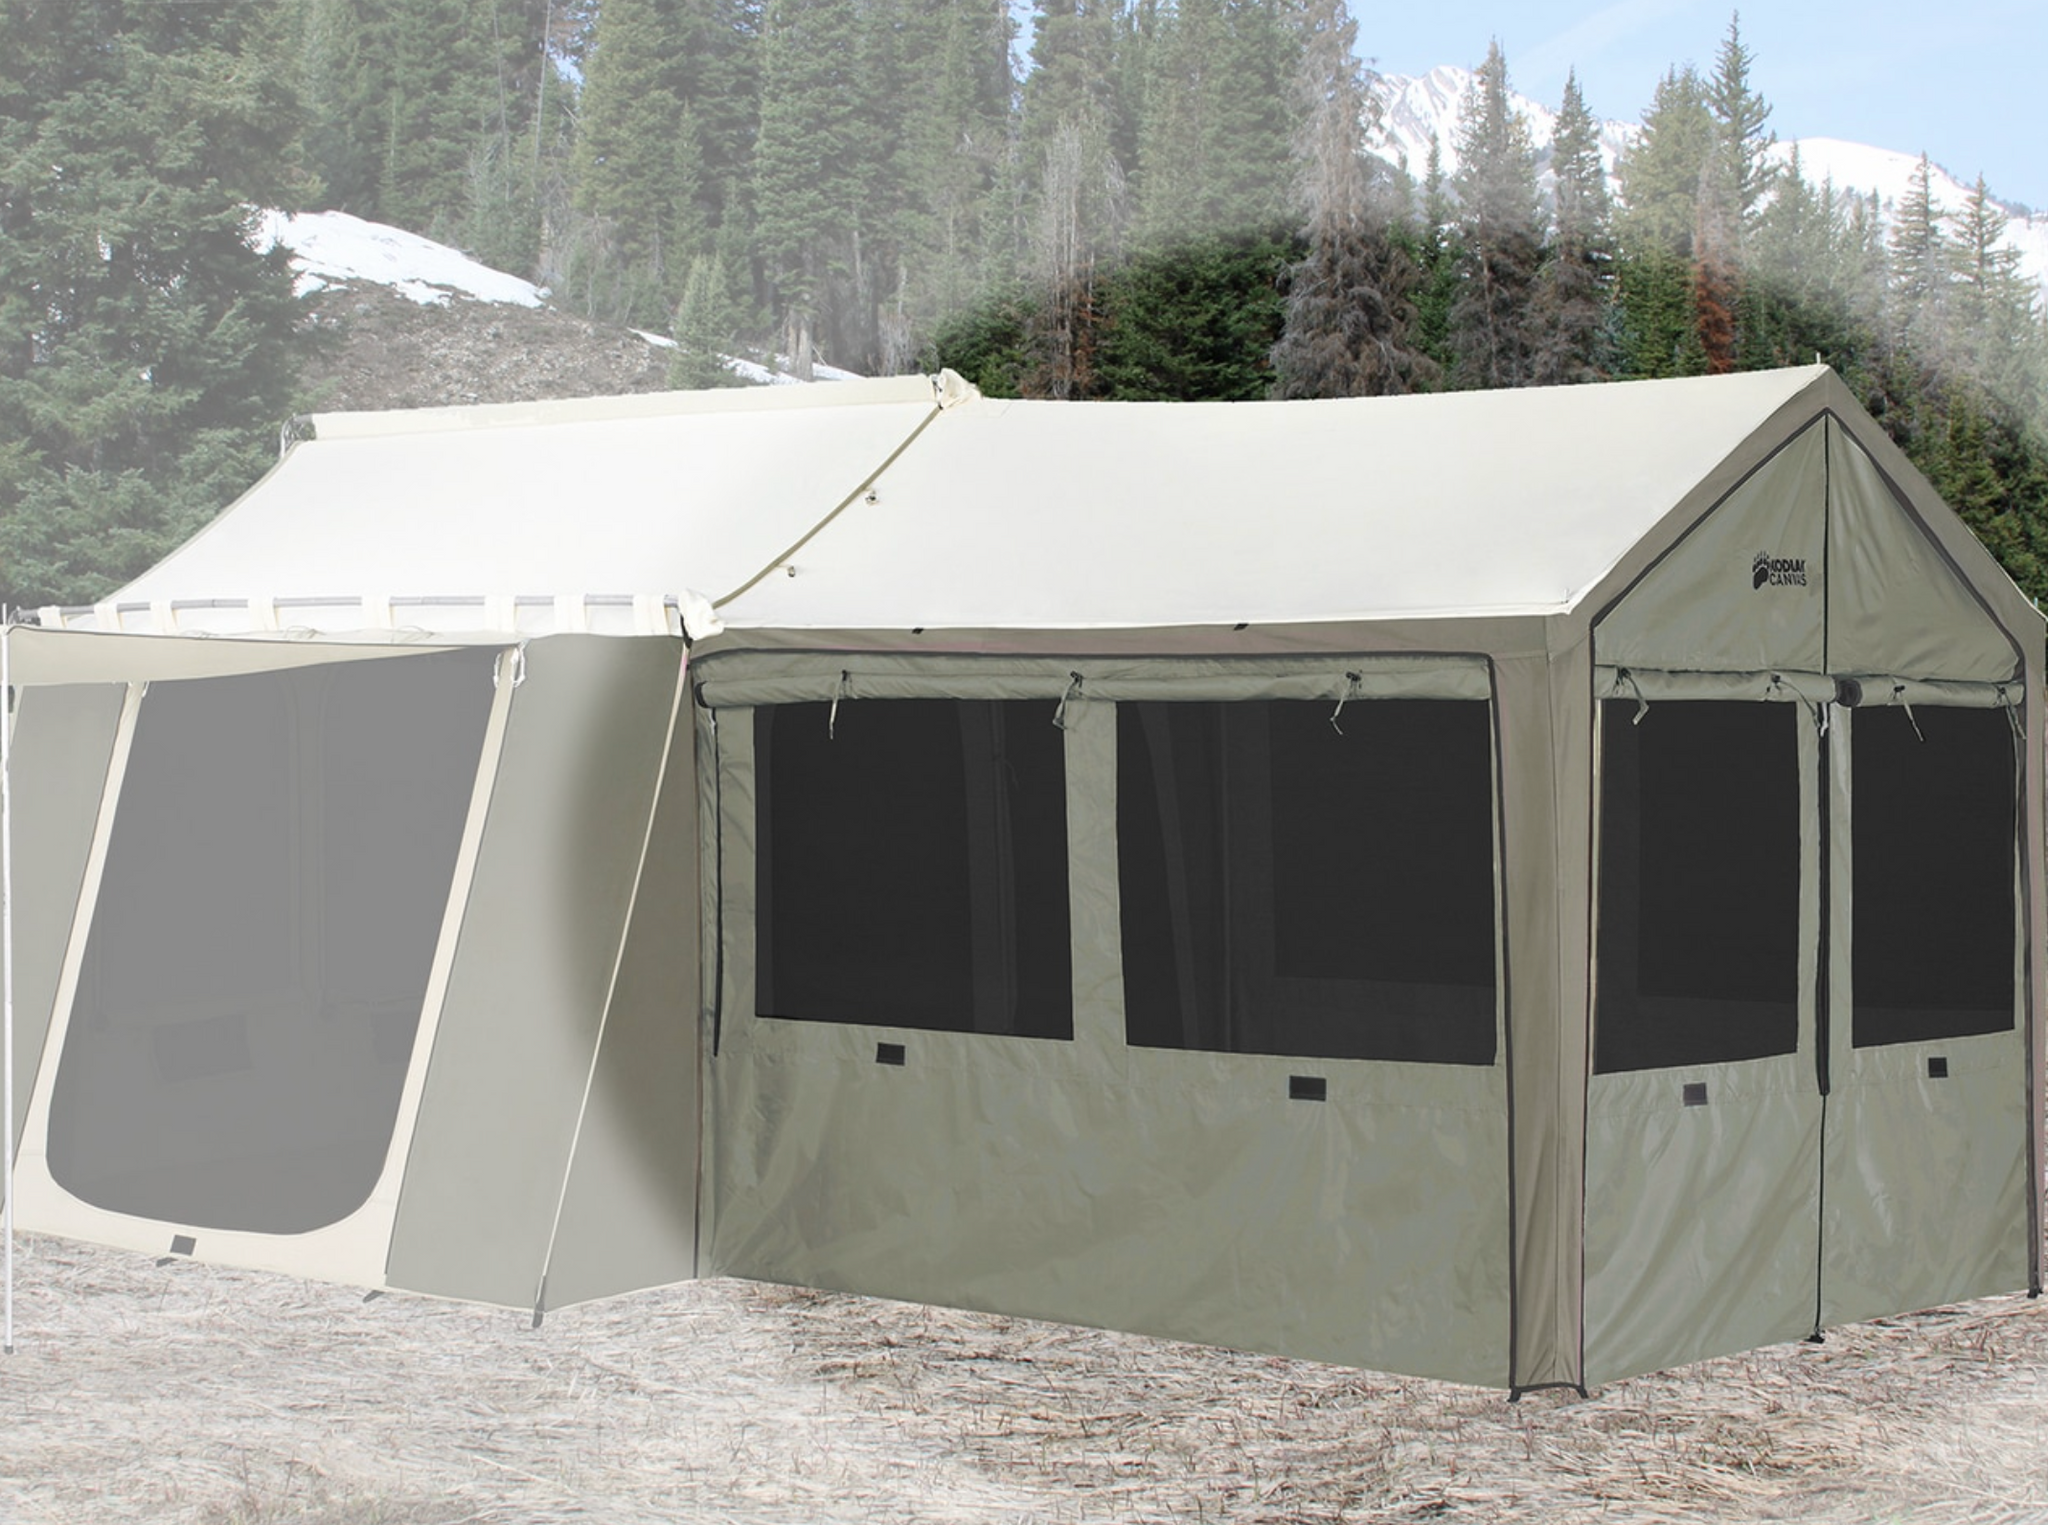 Wall Enclosure 12 x 9 ft Cabin Tent with Deluxe Awning専用